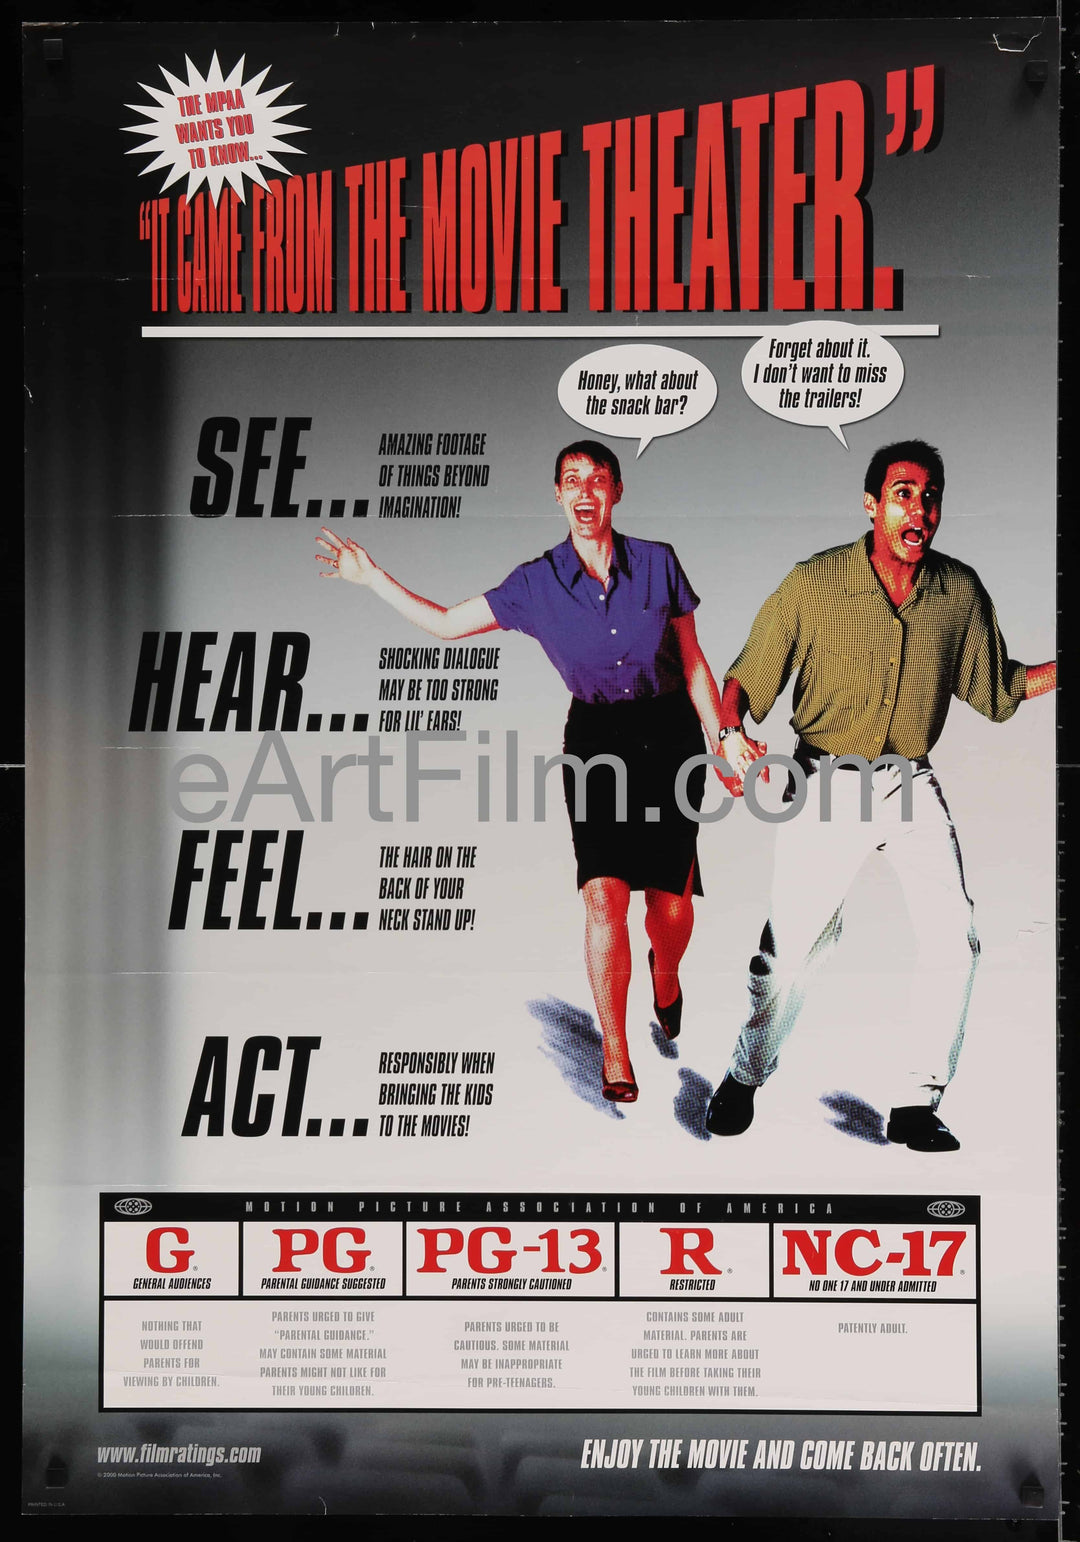 eArtFilm.com U.S One Sheet (26.75"38.75") MPAA movie ratings poster It Came From The Movie Theatre 27x39 2000 MPAA ratings poster RARE!